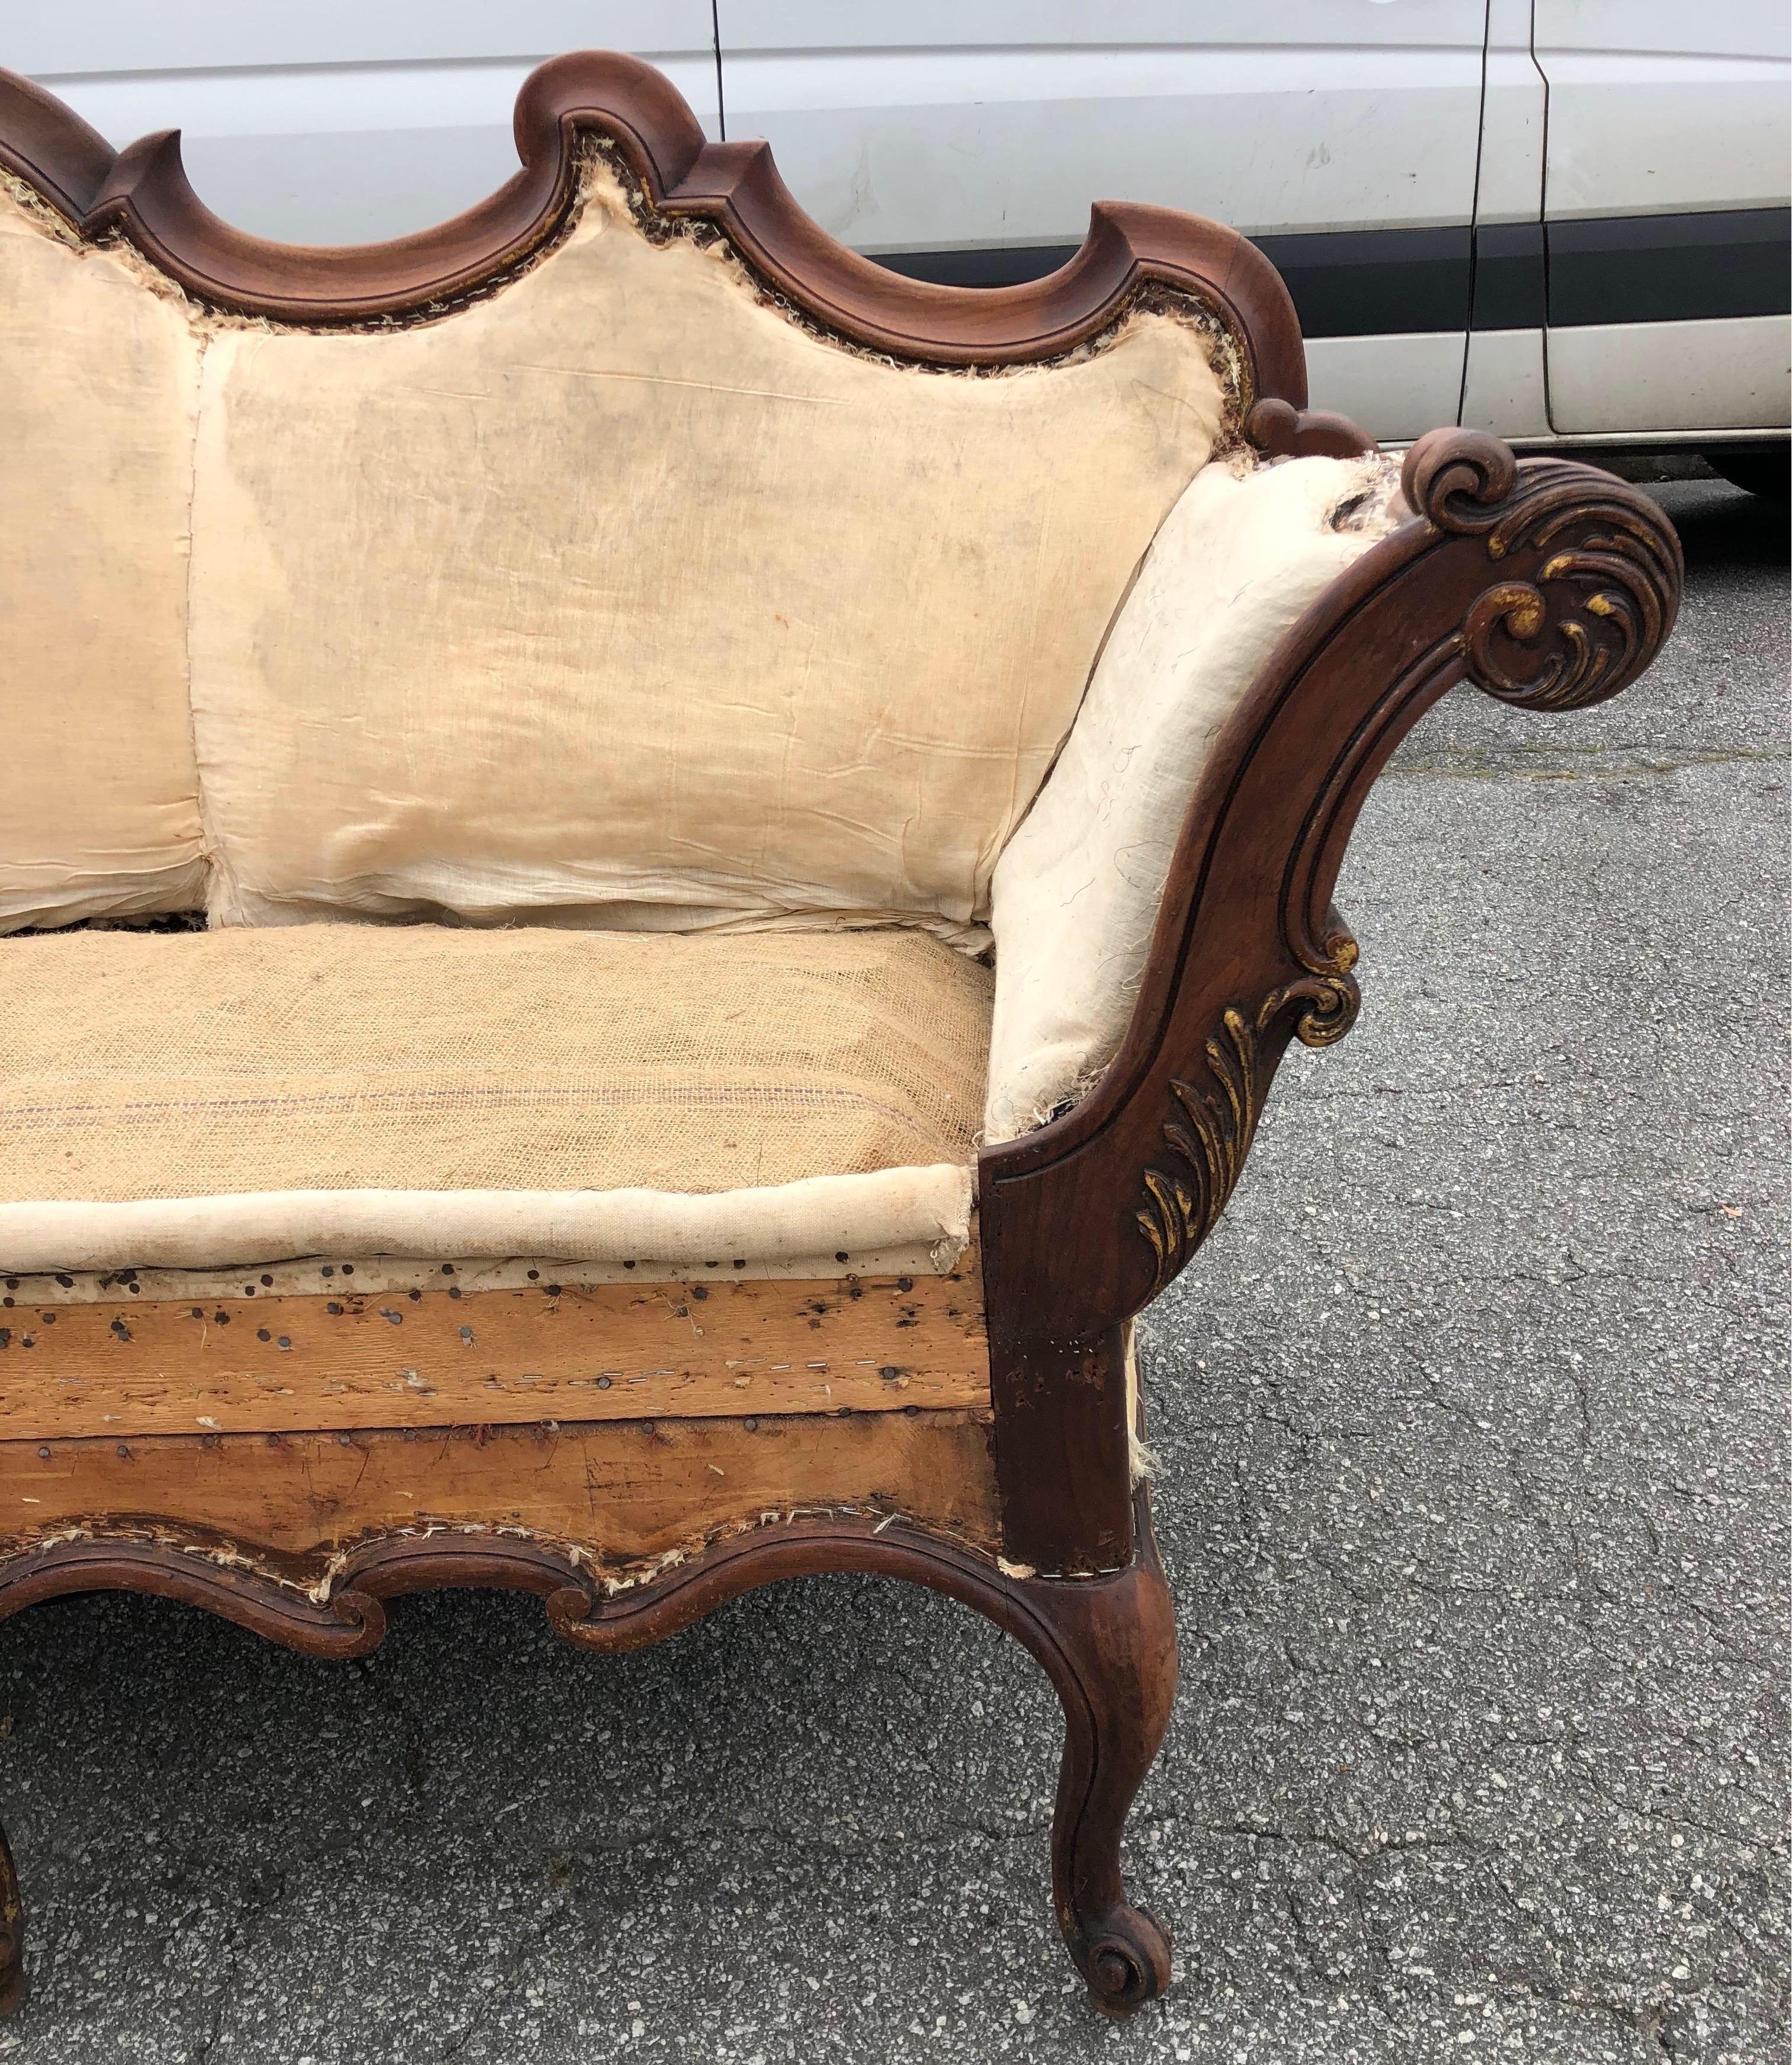 Beautiful 19th century Venetian walnut sofa dressed in original muslin and burlap ready for your choice of upholstery fabric. Carved walnut frame has traces of original parcel gilding on arms and around bottom rails.
  